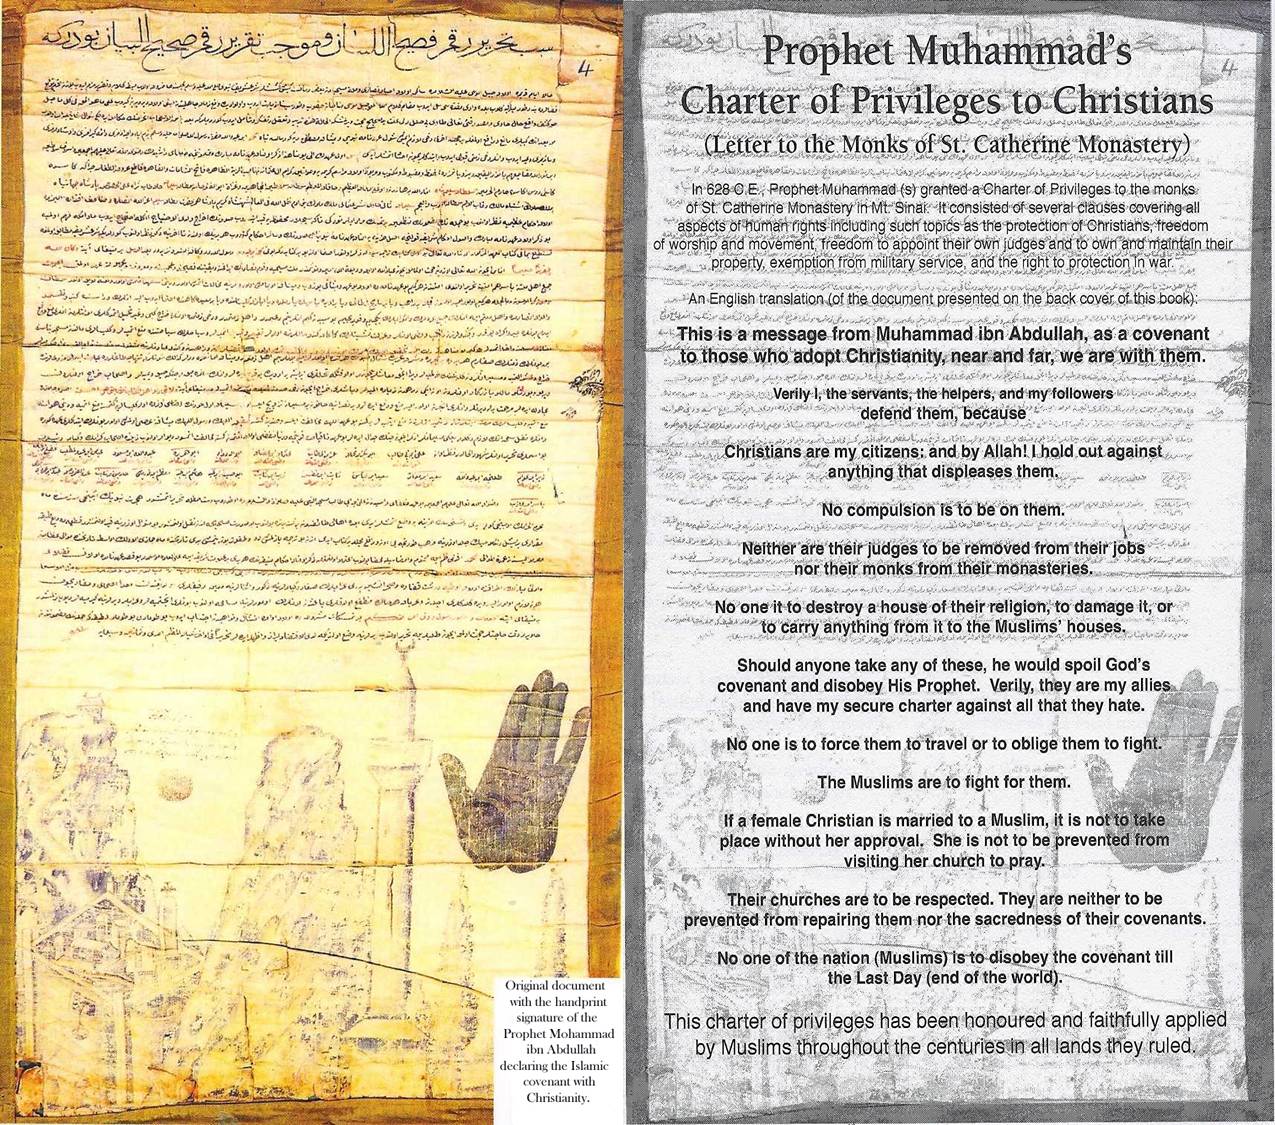 The-covenant-of-the-Prophet-Muhammad-with-the-monks-of-Mount-Sinai.jpg